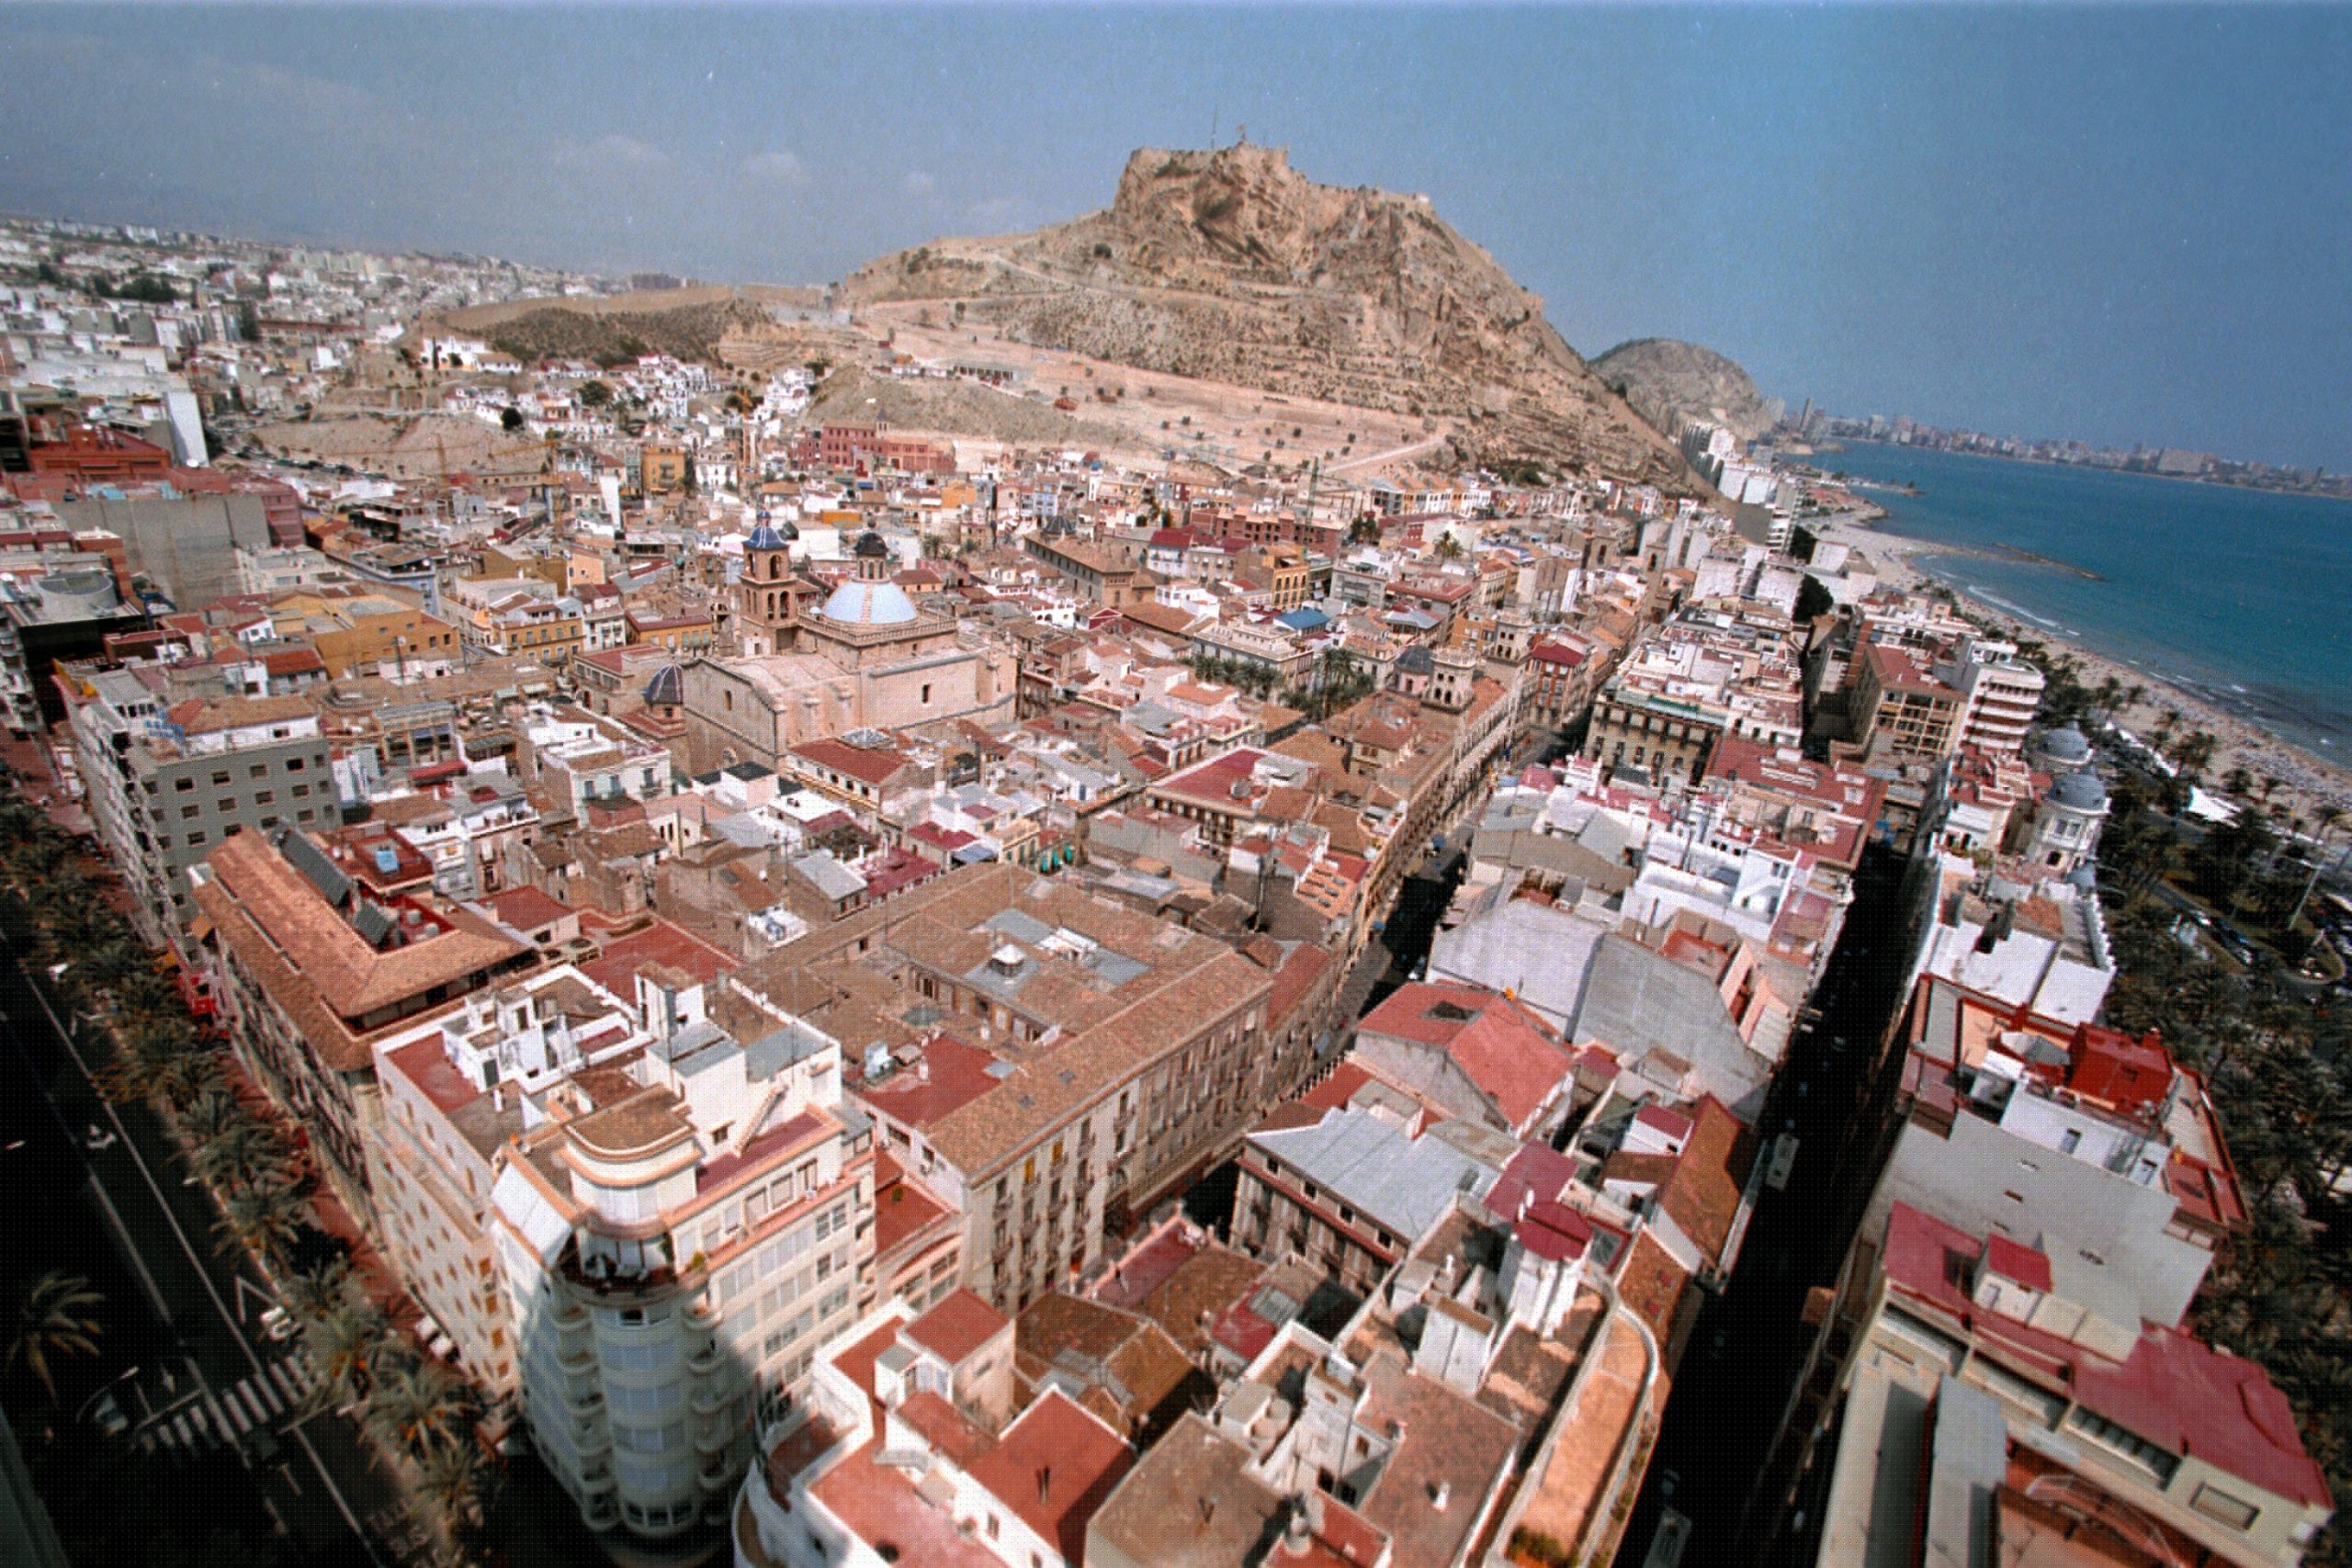 Live music fans are targetted by Alicante City to book overnight stays on Spain's Costa Blanca